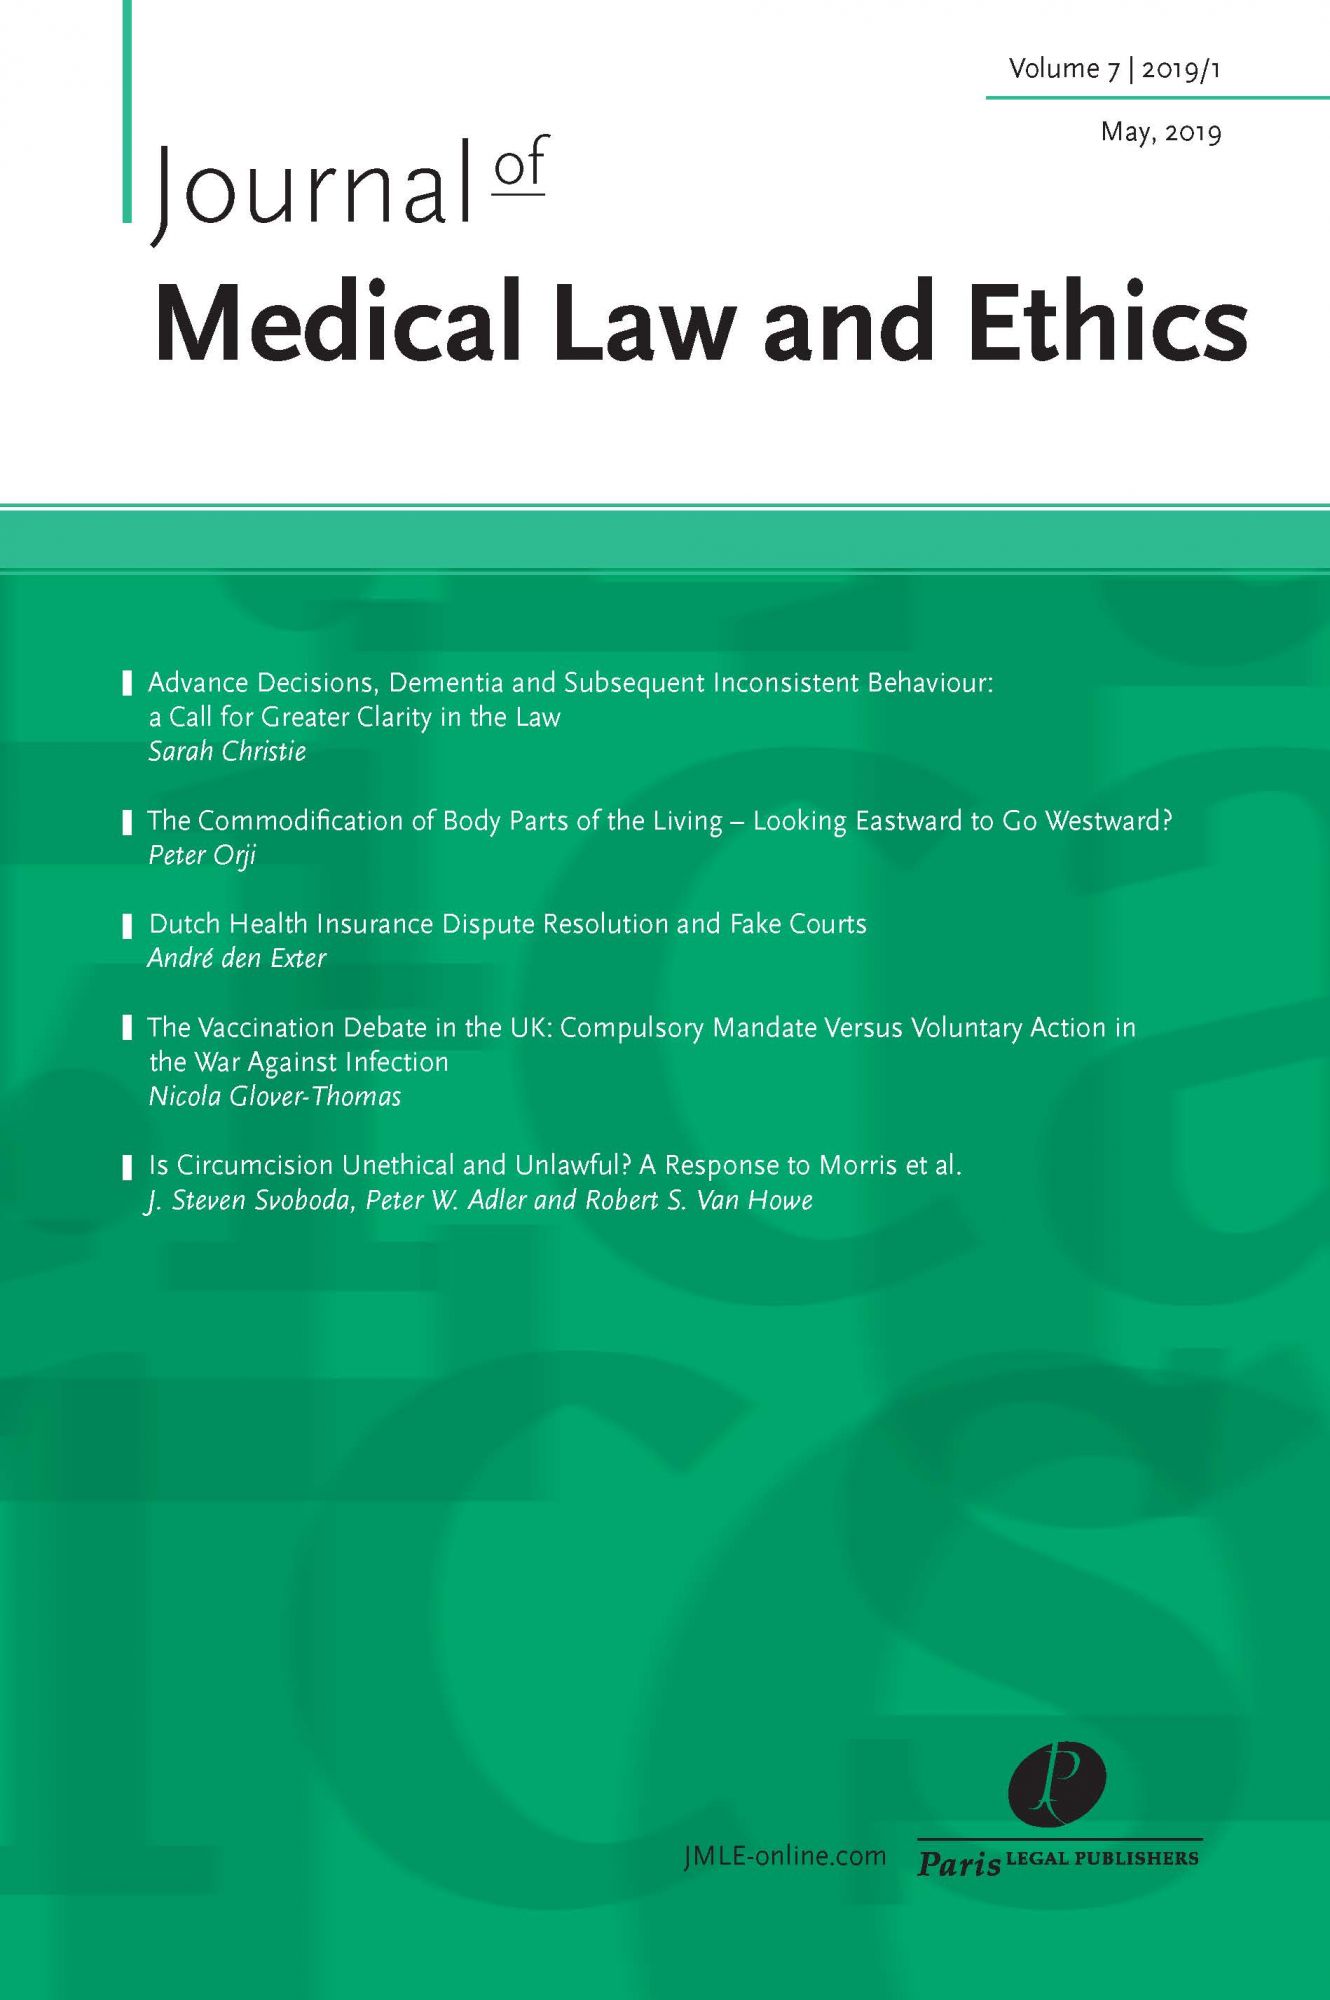 journal of research in medical education & ethics